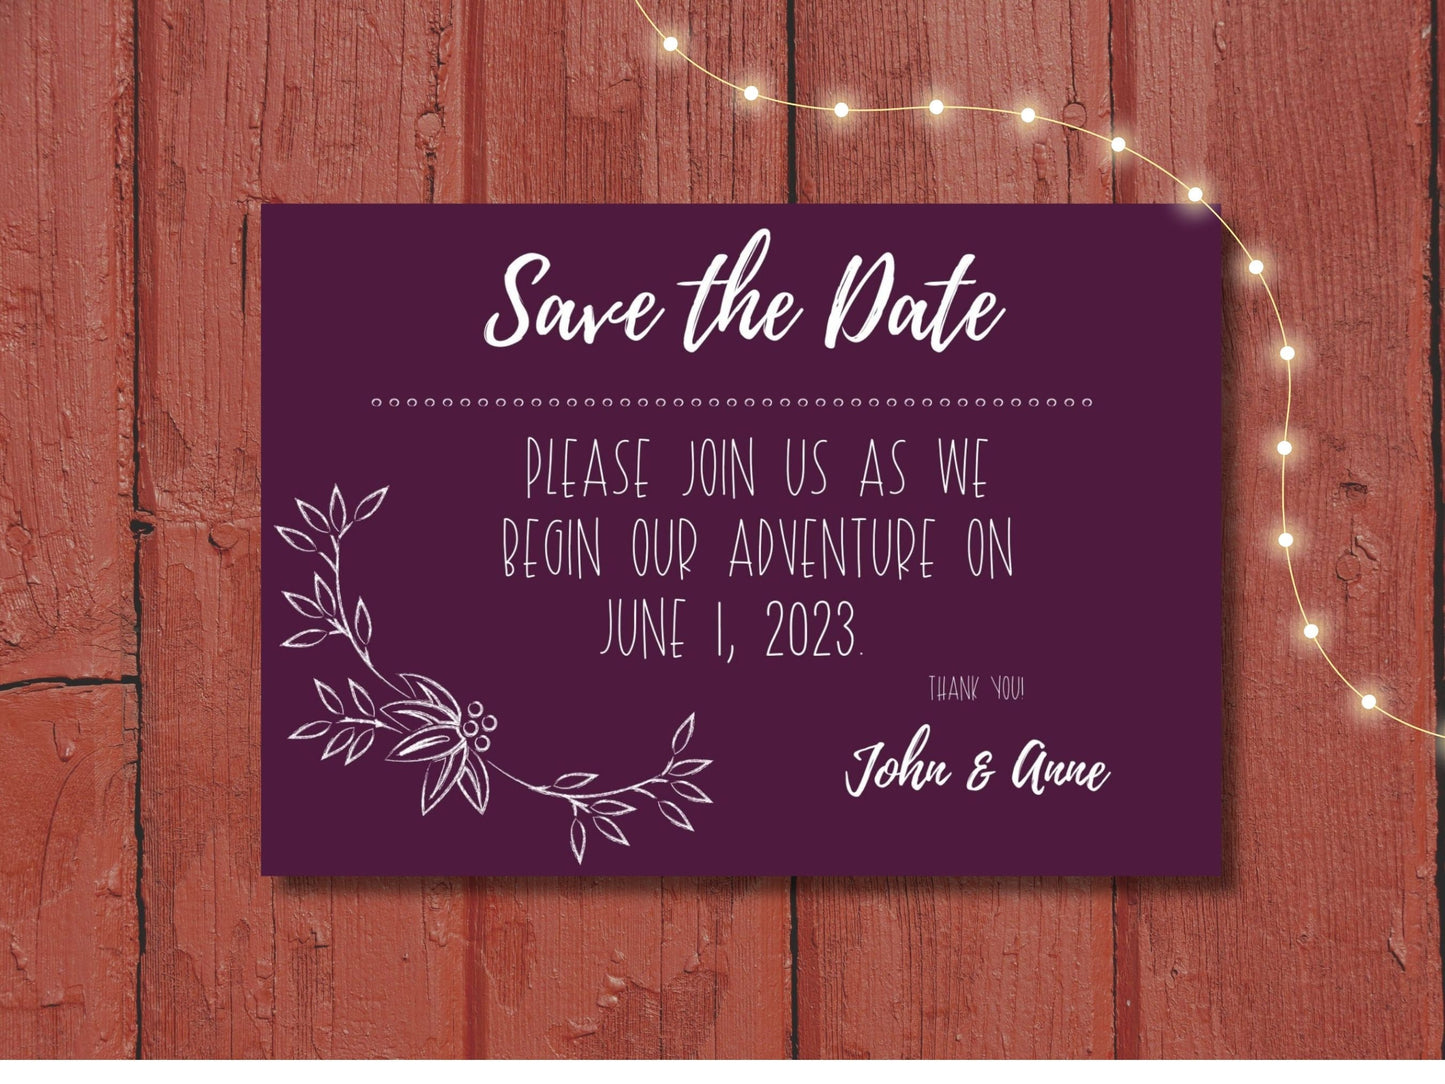 Capture the Essence of Autumn with Deep Purple Save the Date Cards in Enchanting Jewel Tones